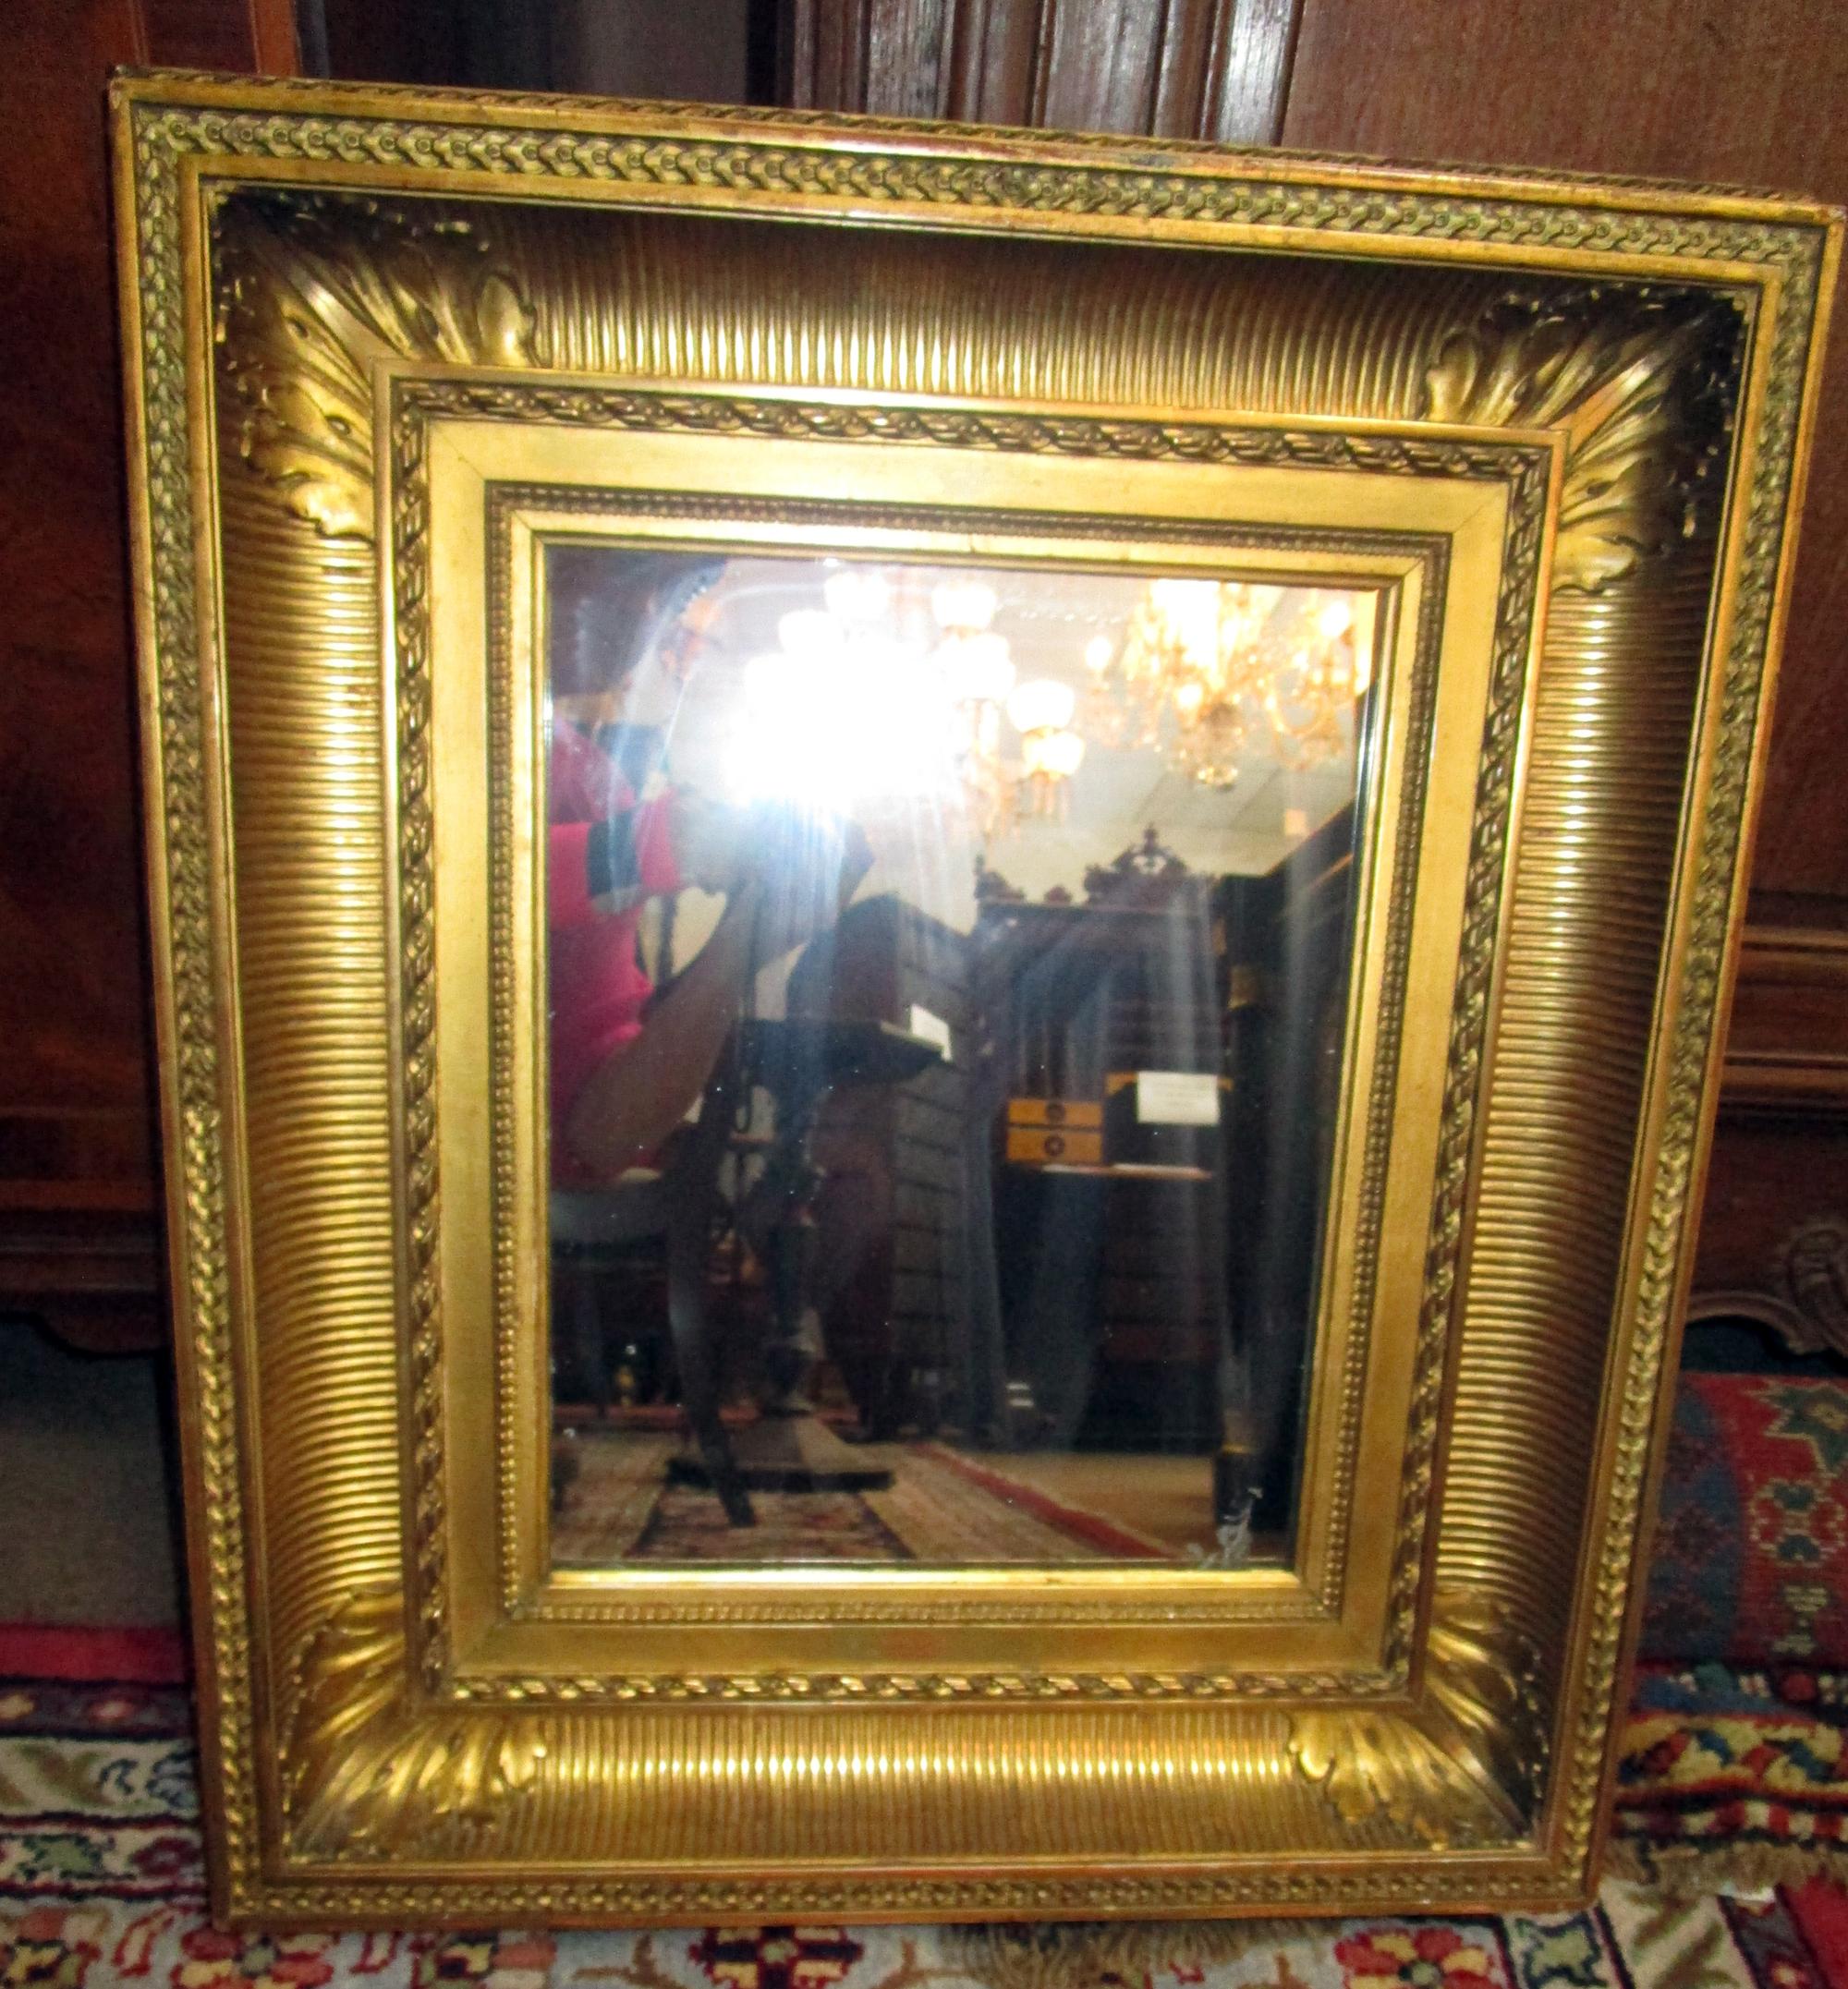 19th century Gold Gilt Wooden Framed Mirror by Charles H. West, London 1